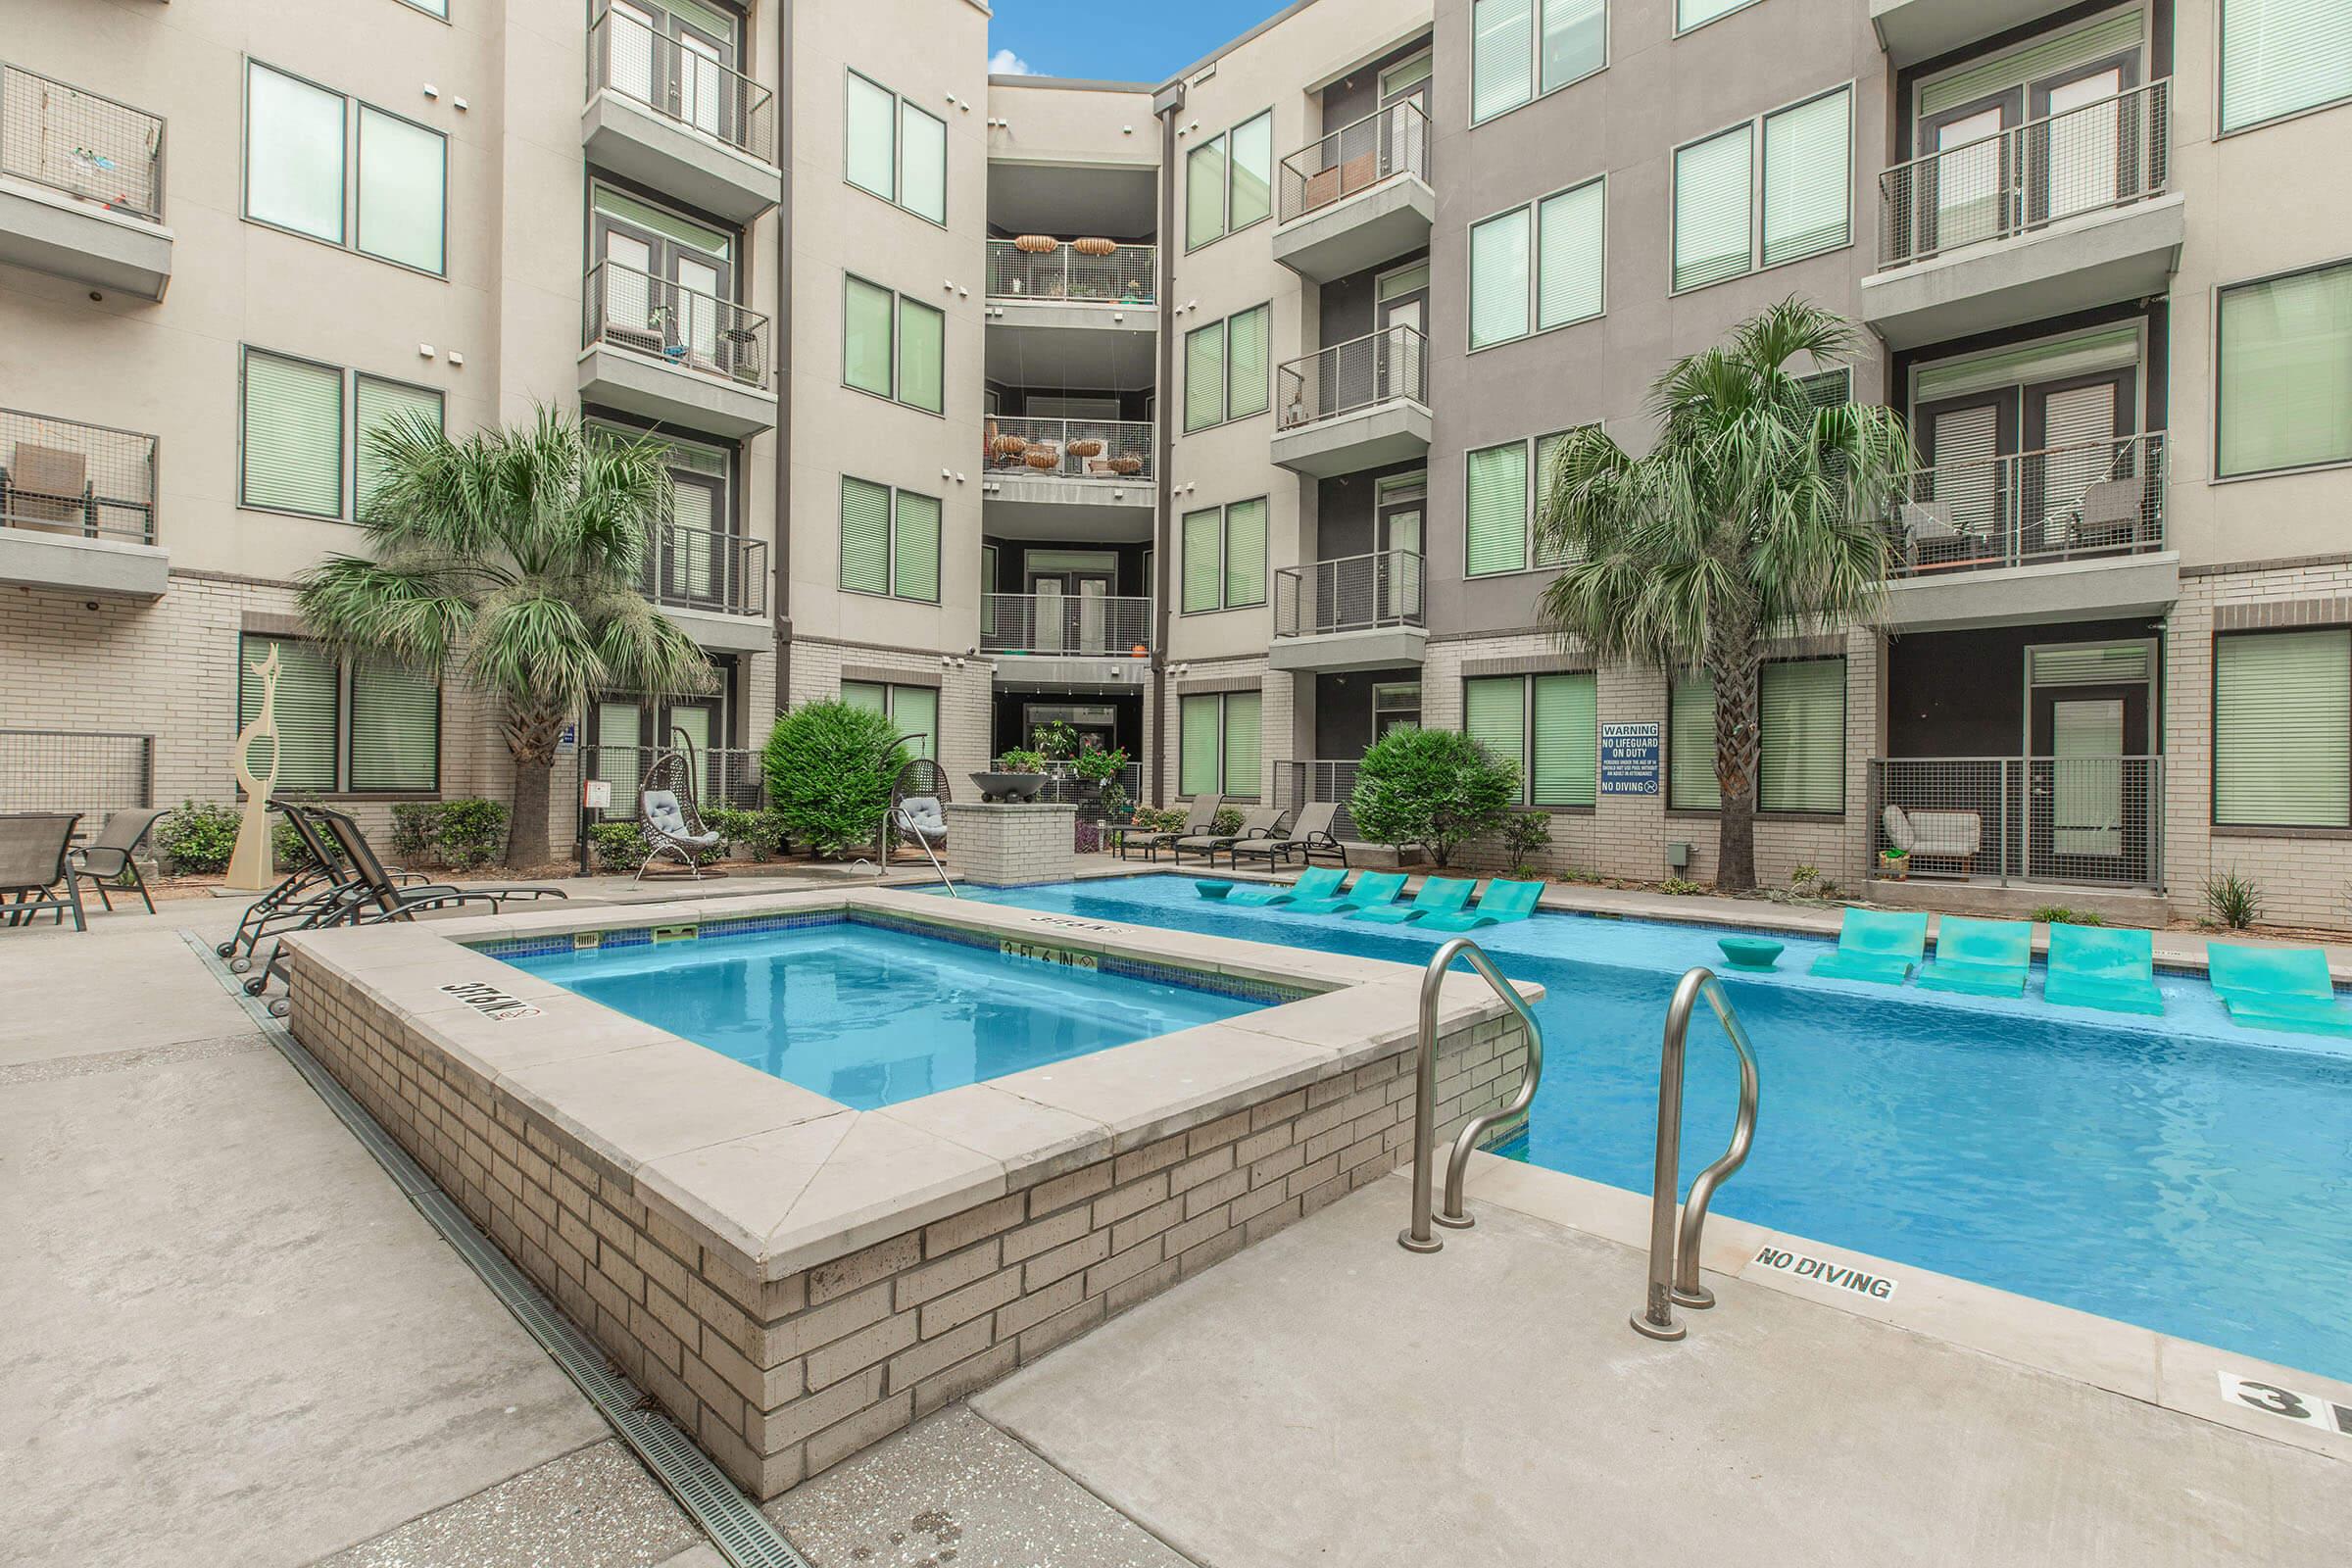 a pool of water in front of a building